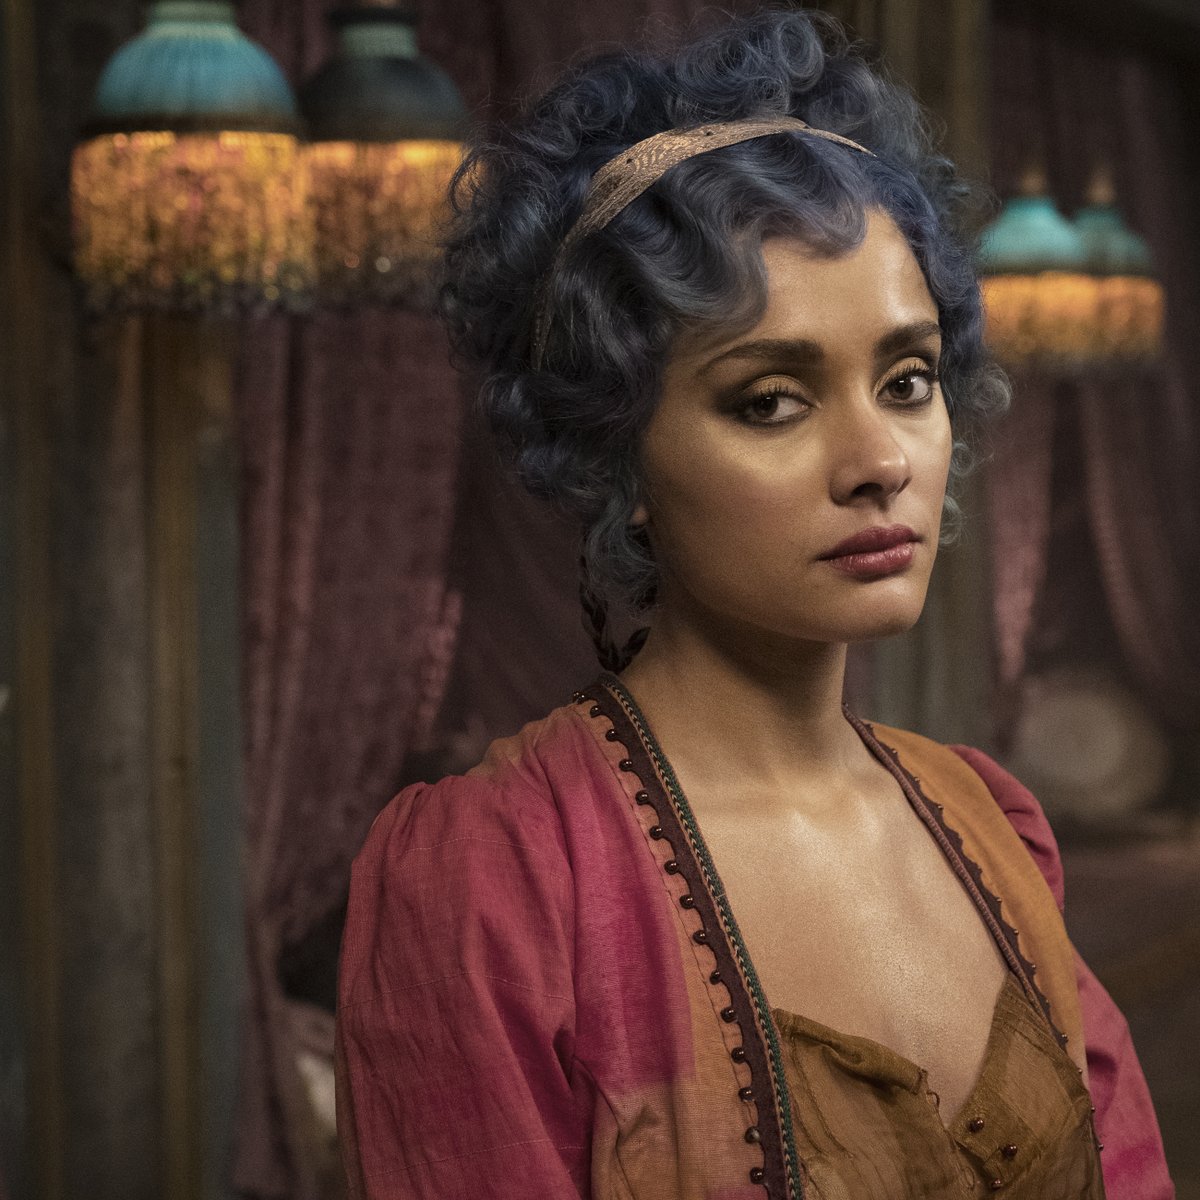 Another birthday in The Burgue! 🧚 Send all your best birthday wishes to Karla Crome. #CarnivalRow